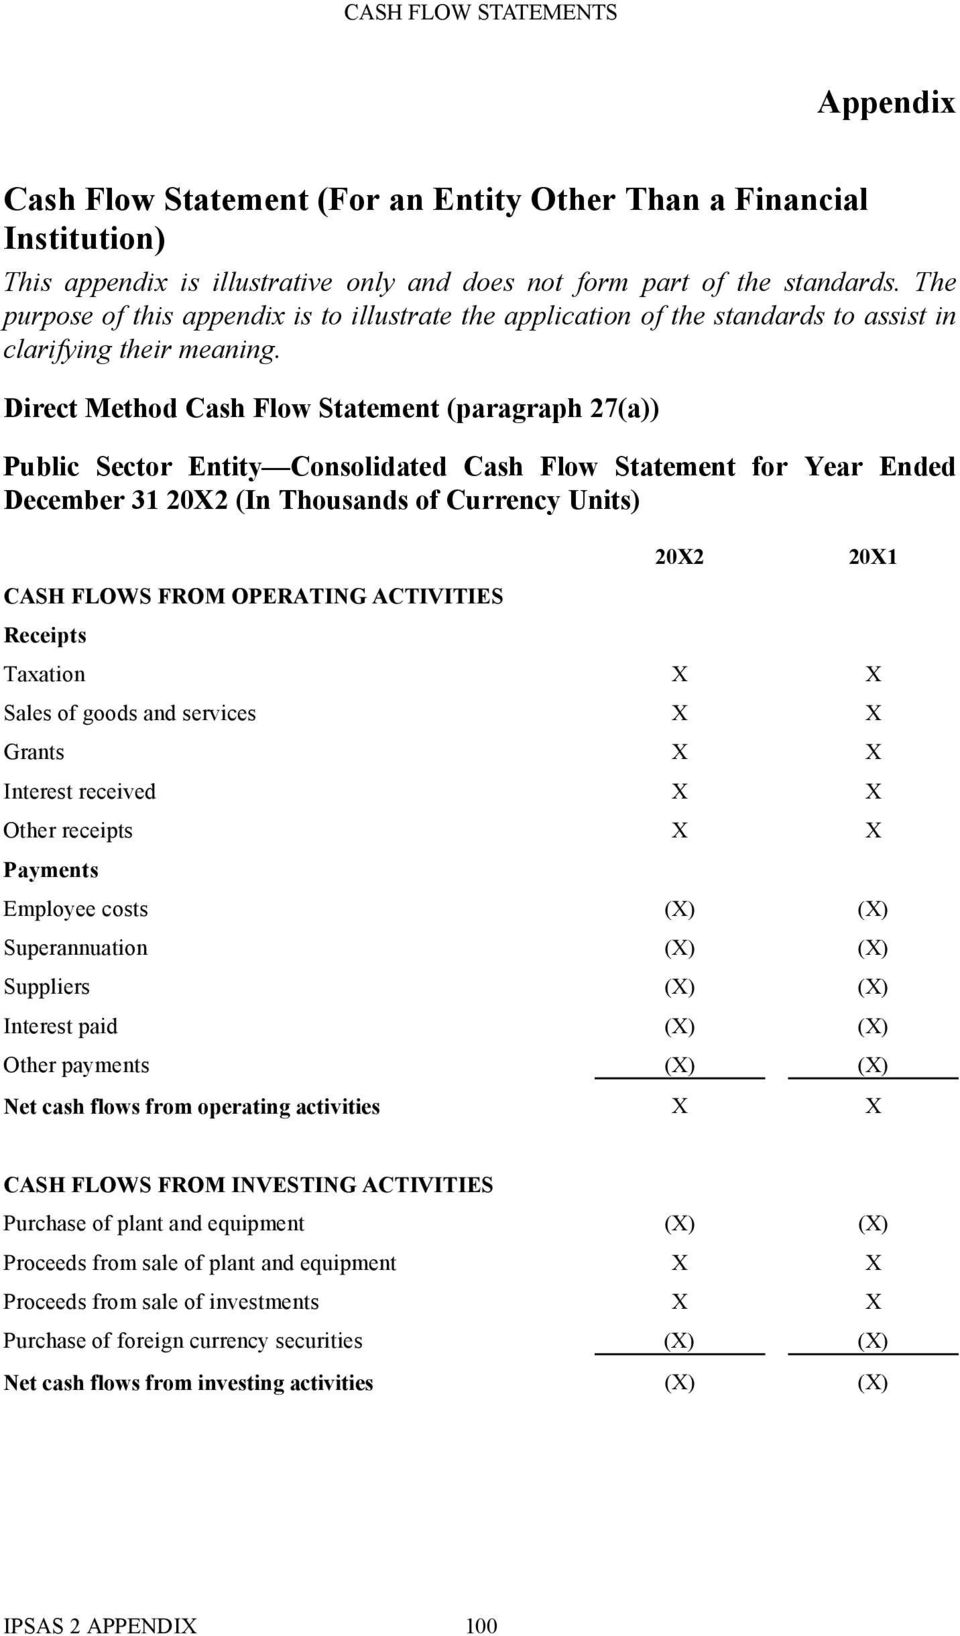 Direct Method Cash Flow Statement (paragraph 27) Public Sector Entity Consolidated Cash Flow Statement for Year Ended December 31 20X2 (In Thousands of Currency Units) 20X2 20X1 CASH FLOWS FROM